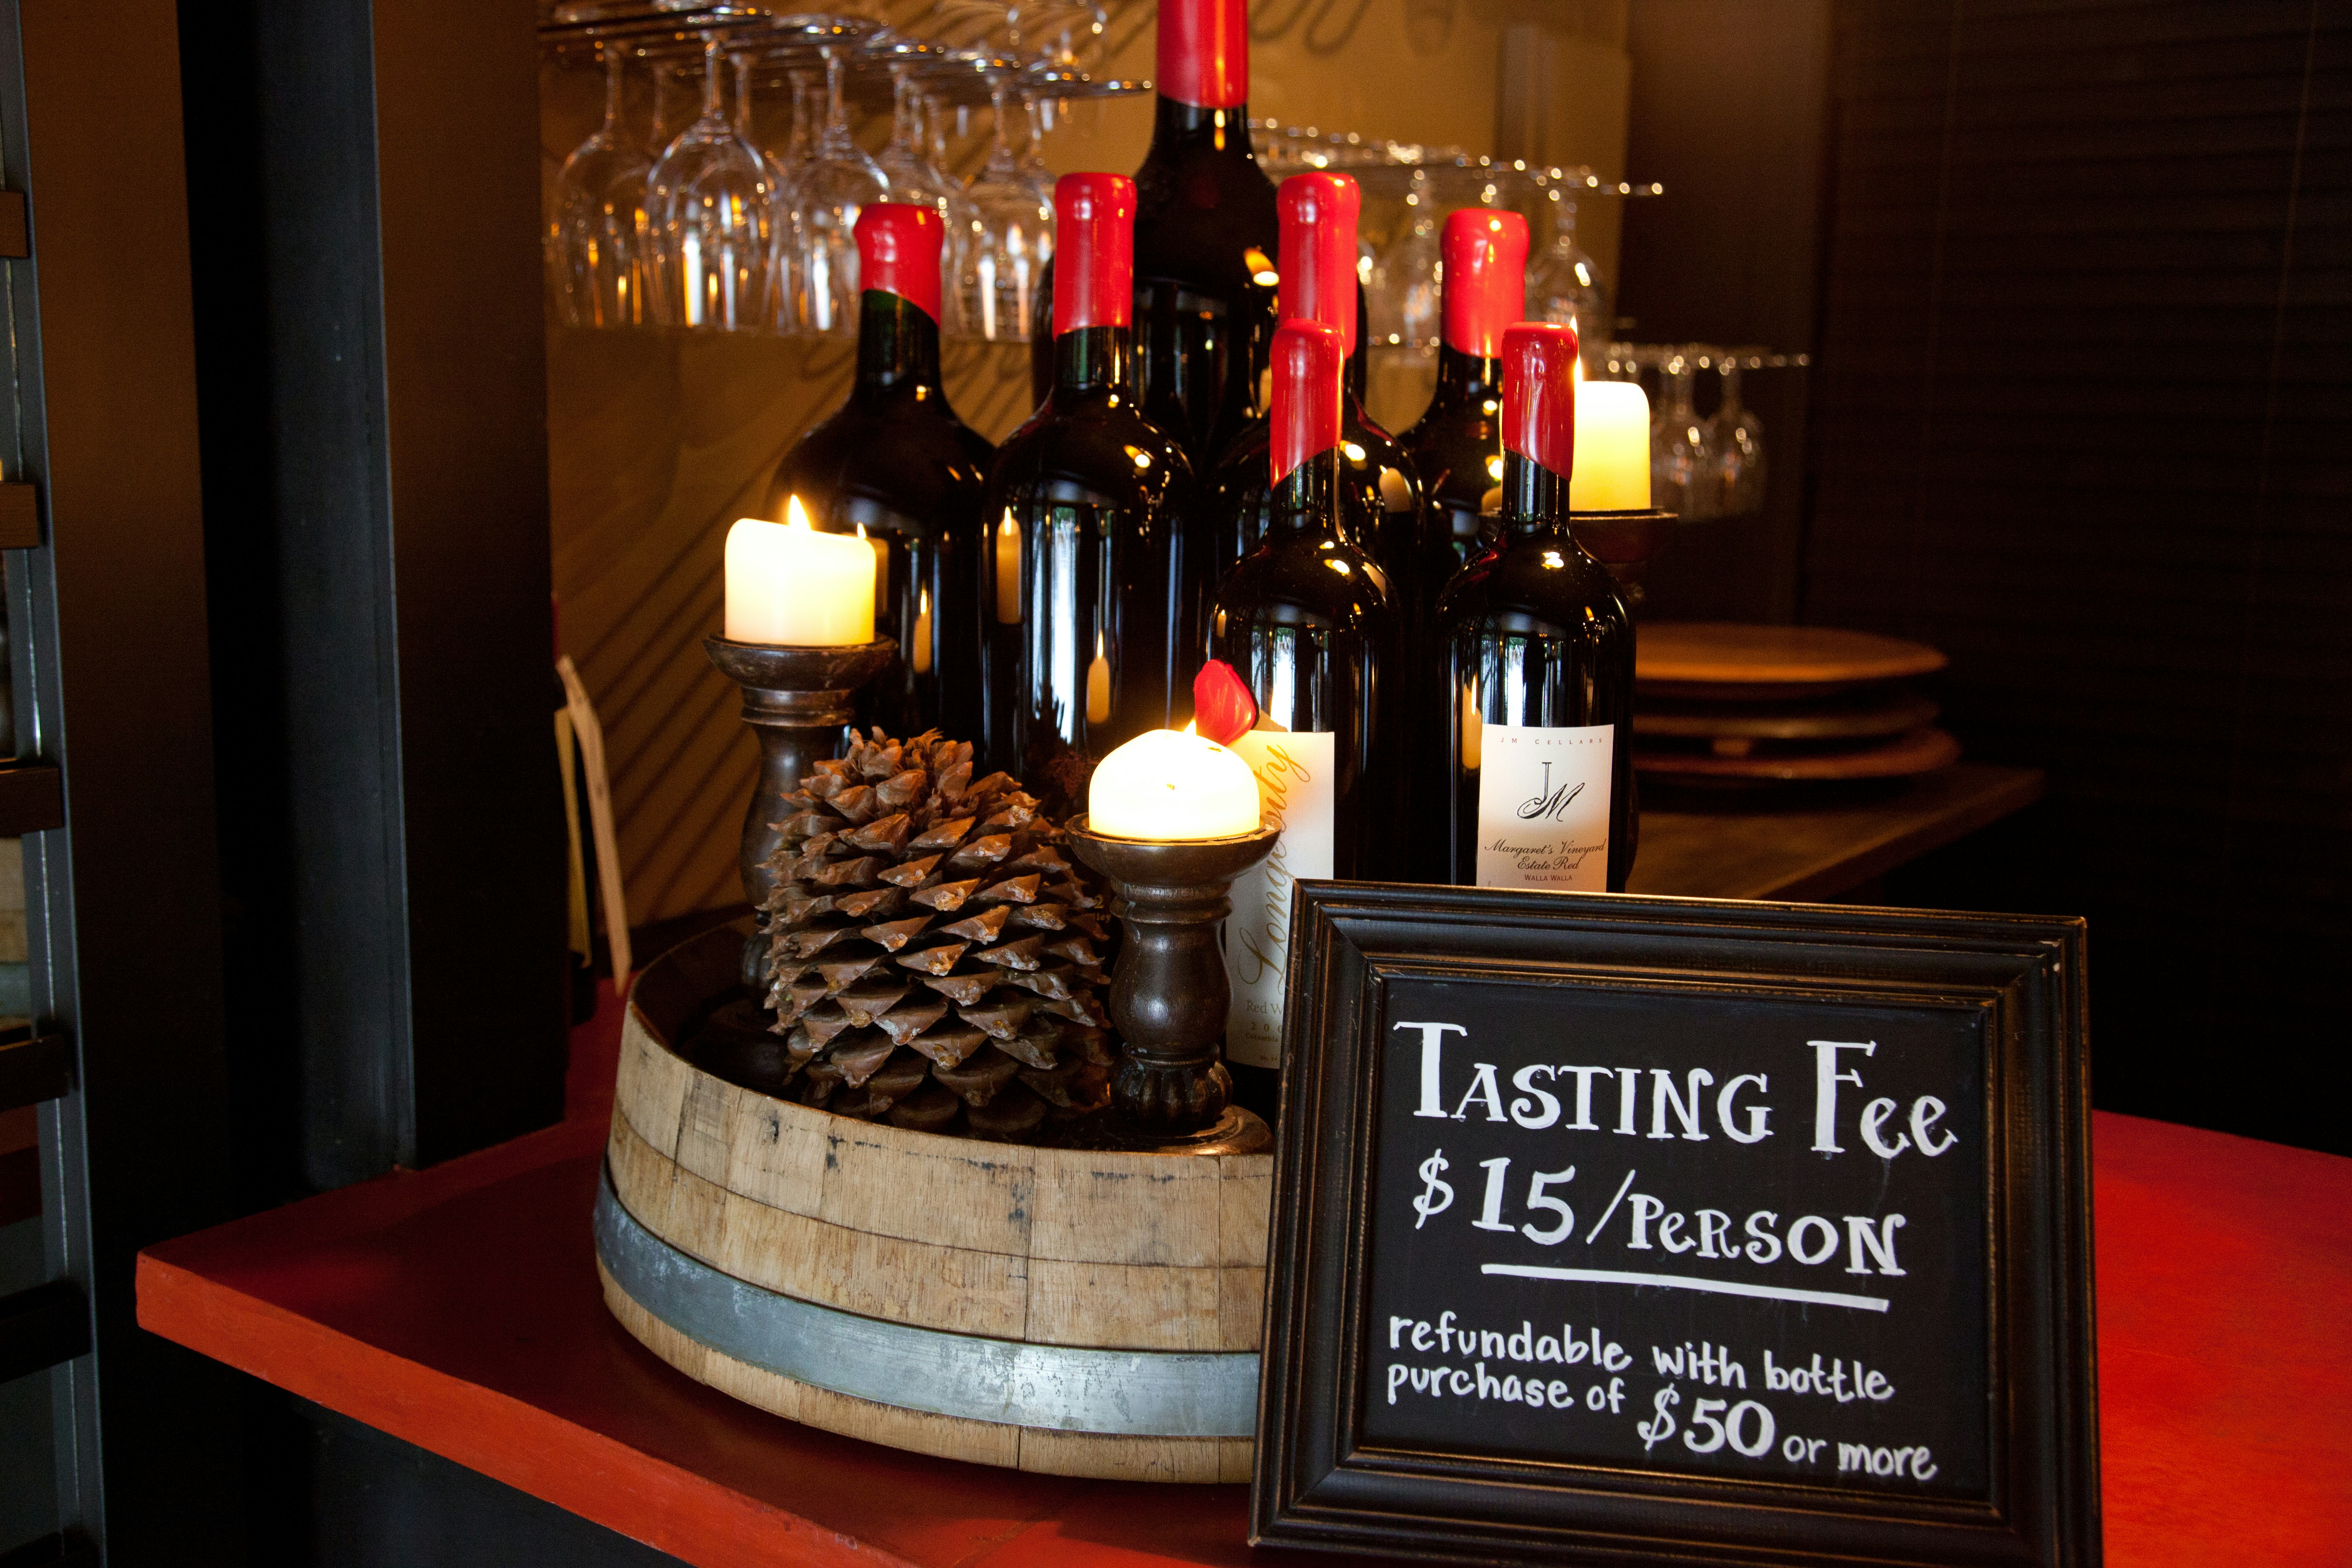 An arrangement of red wine bottles topped with red melted wax, pine cones, and candles sits on a dimly lit red counter with a chalkboard sign that reads "tasting fee $15 per person" in white letters. In the background, clear wine glasses hang upside down from a shelf.